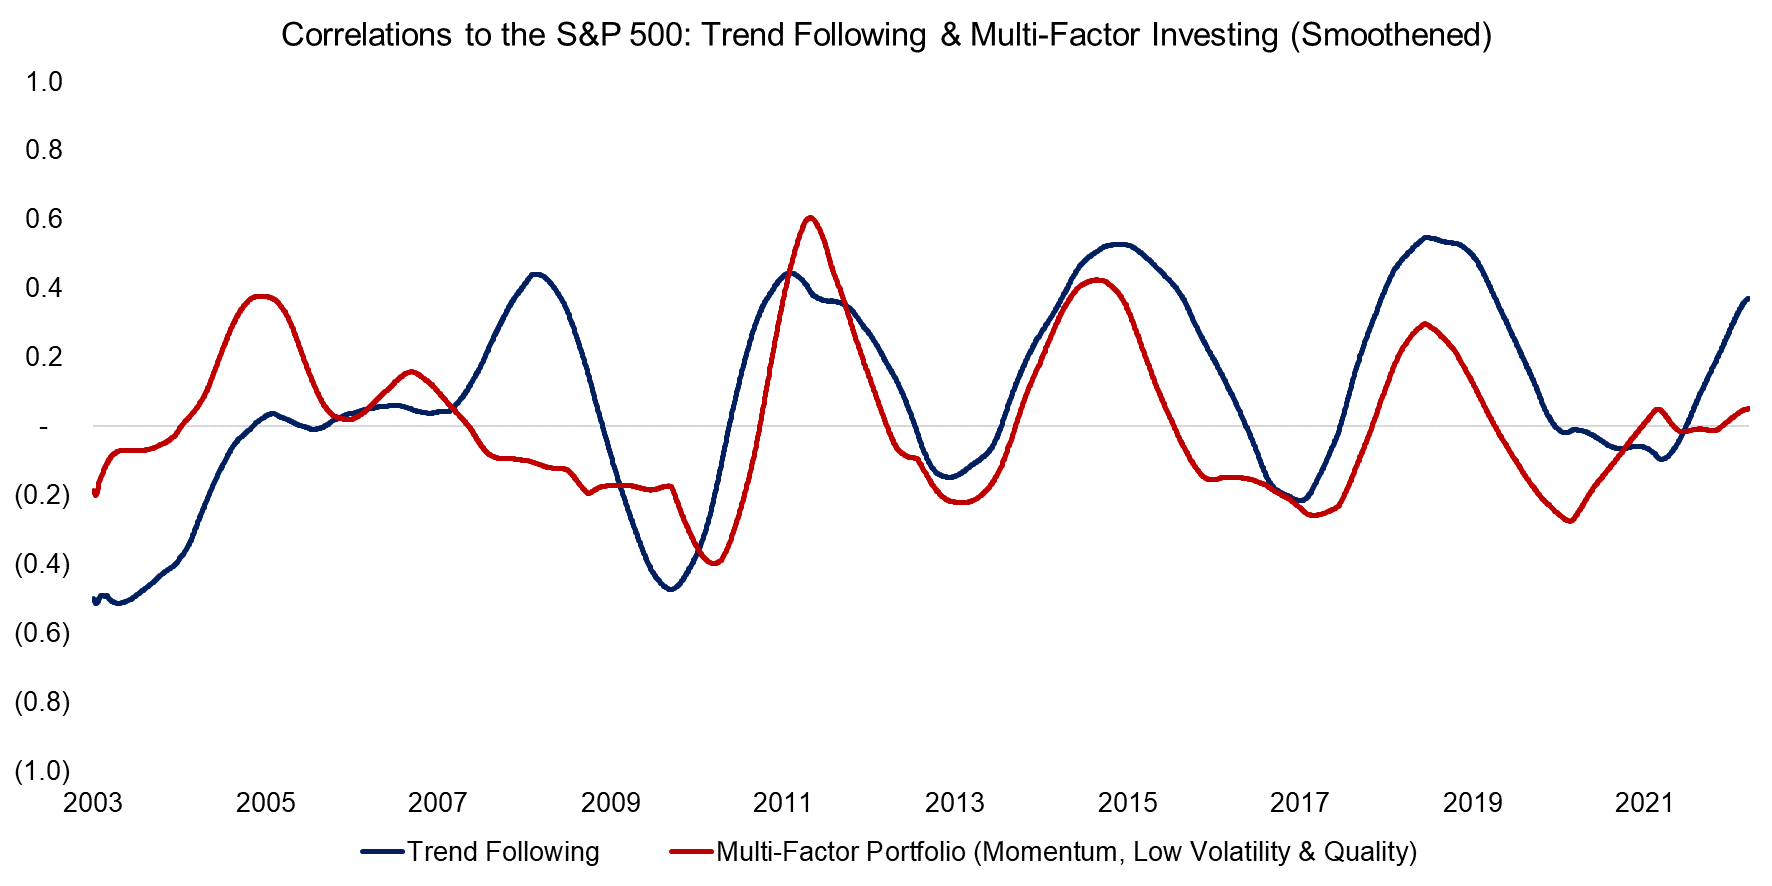 Correlations to the S&P 500 Trend Following & Multi-Factor Investing (Smoothened)